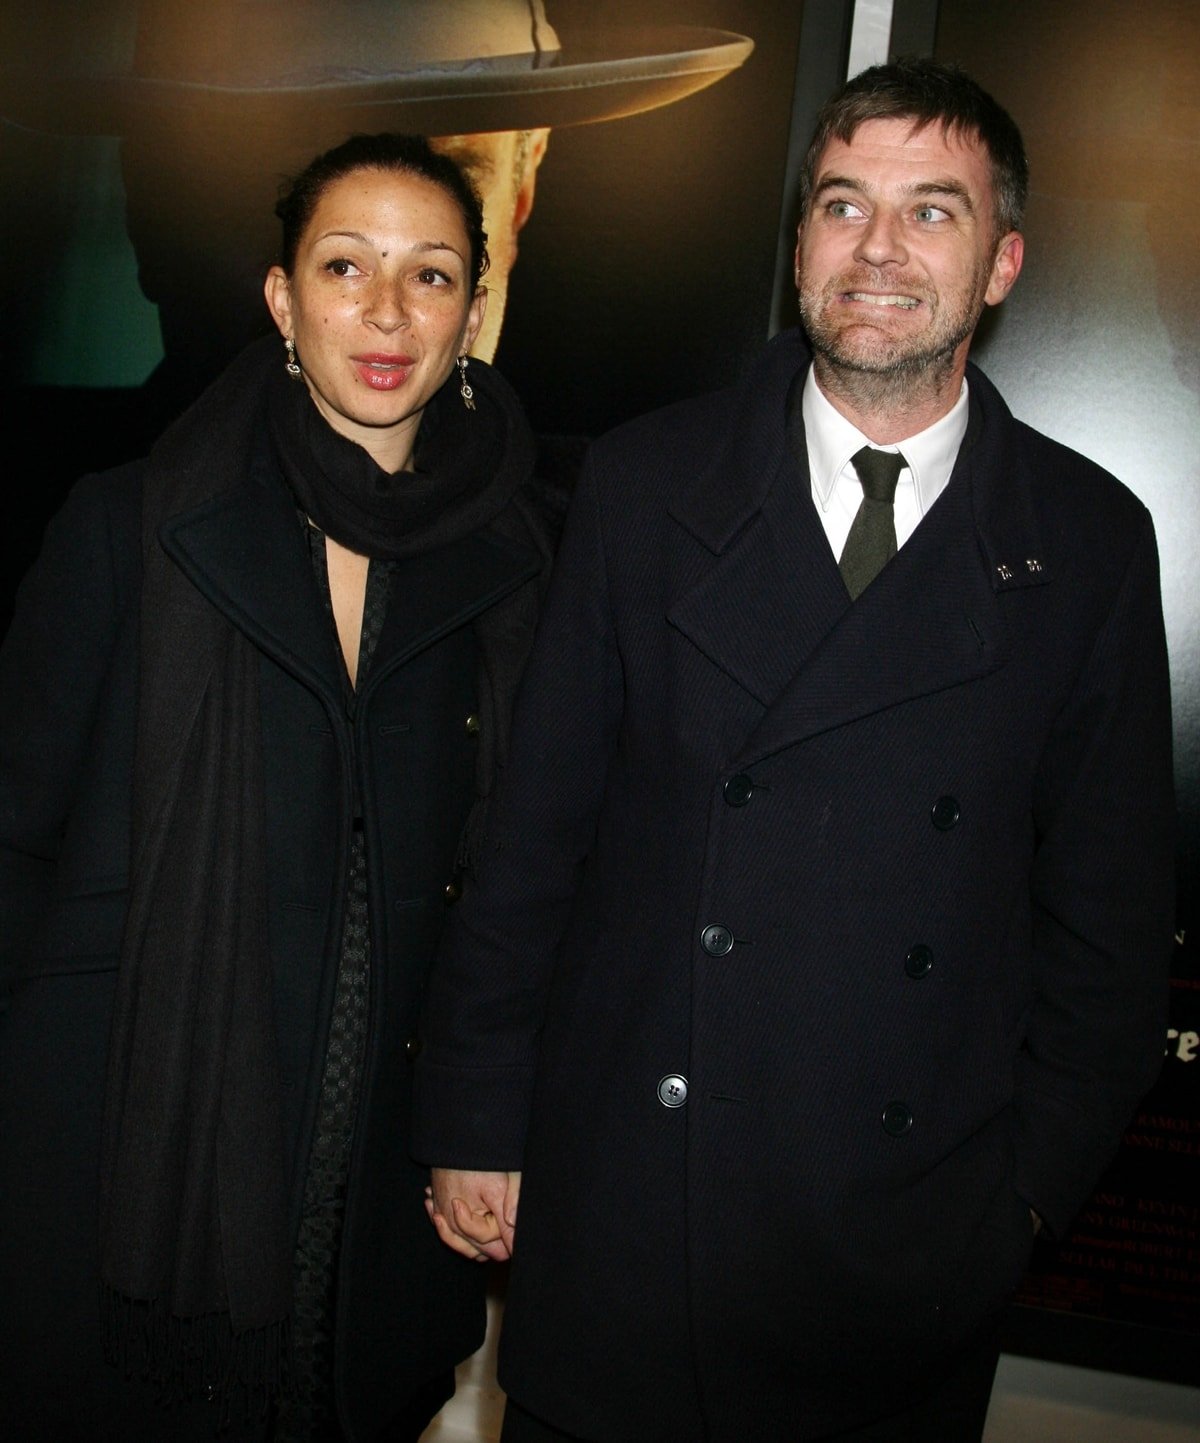 Maya Rudolph and Paul Thomas Anderson started dating in 2001 and are the parents of four children